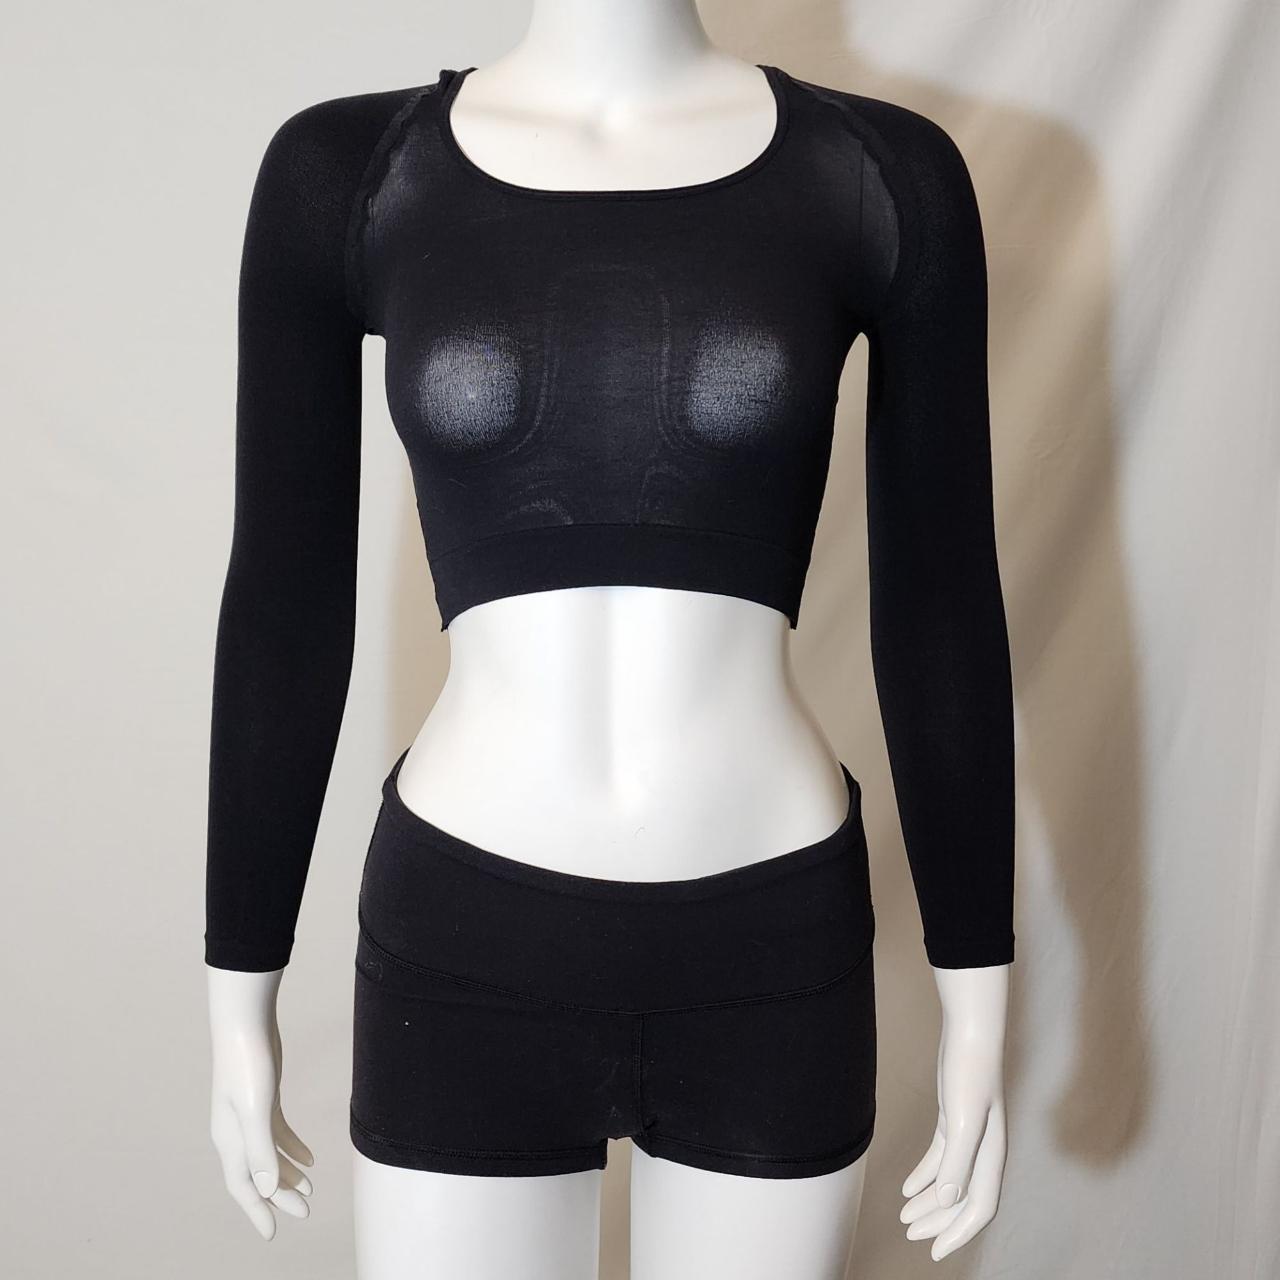 Spanx black black opaque layer arm tights top, ⚫Size